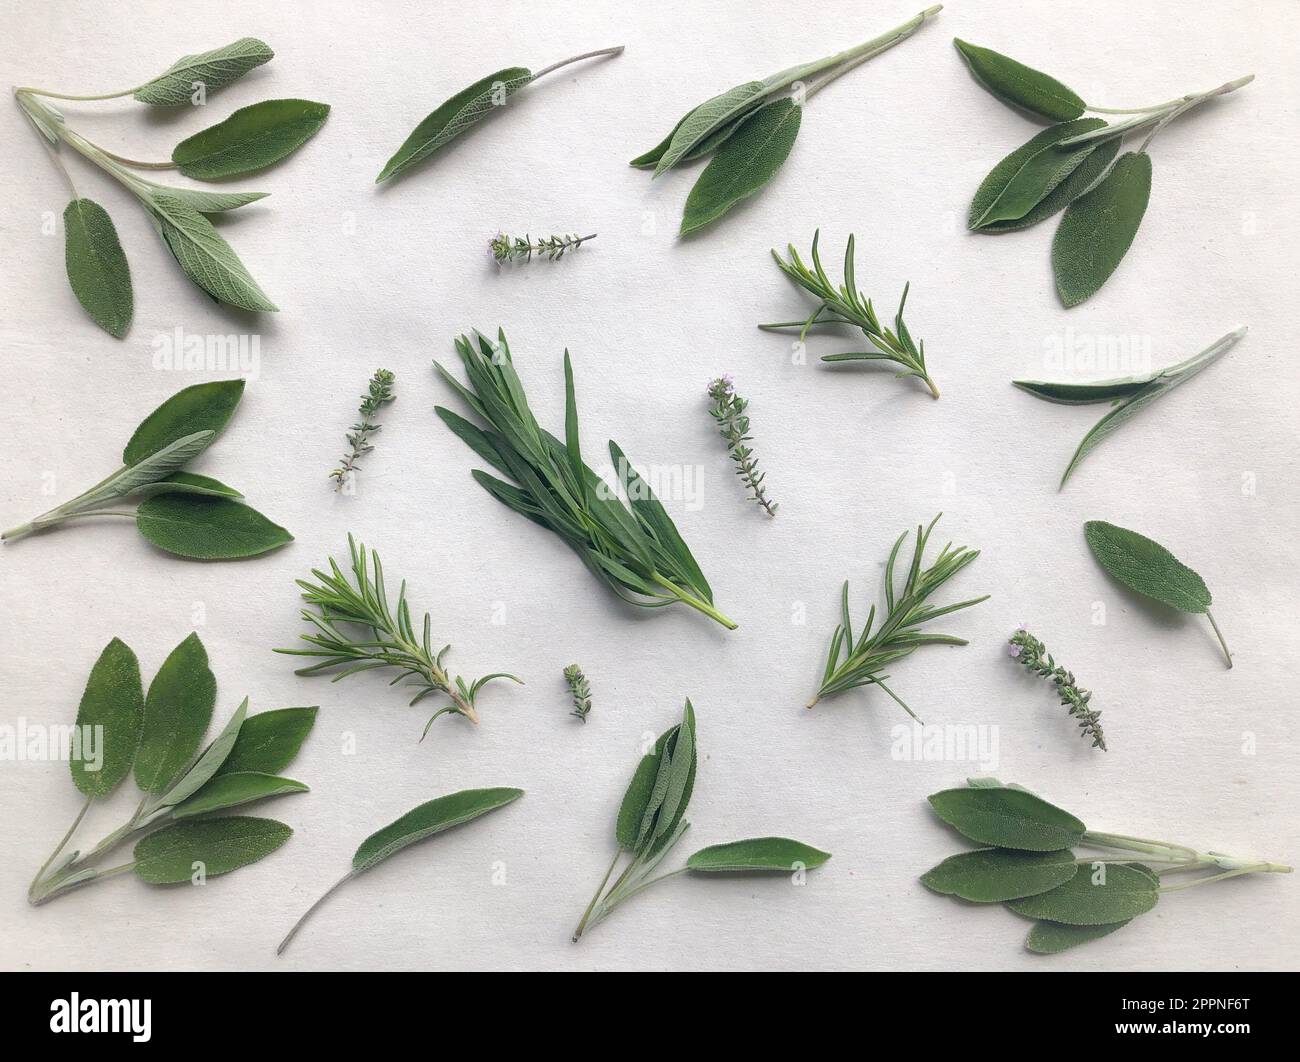 Herbs isolated on a white background, including  fresh sage, tarragon, rosemary and thyme Stock Photo